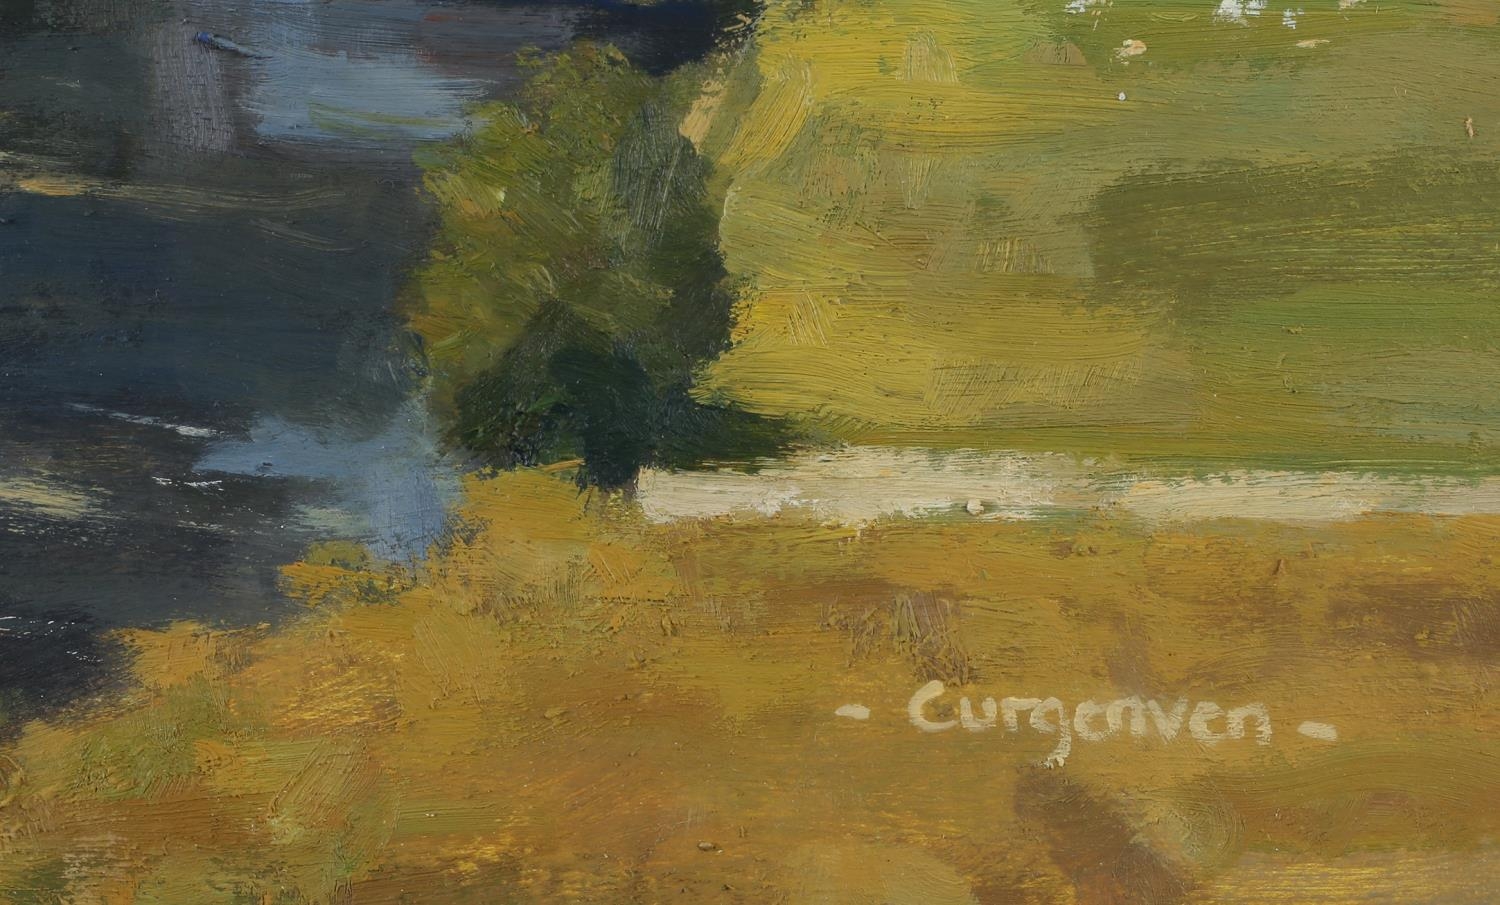 ARR Michael Curgenven (20th/21st century), Kettlewell, North Yorkshire Dales, oil on board, signed - Image 4 of 4